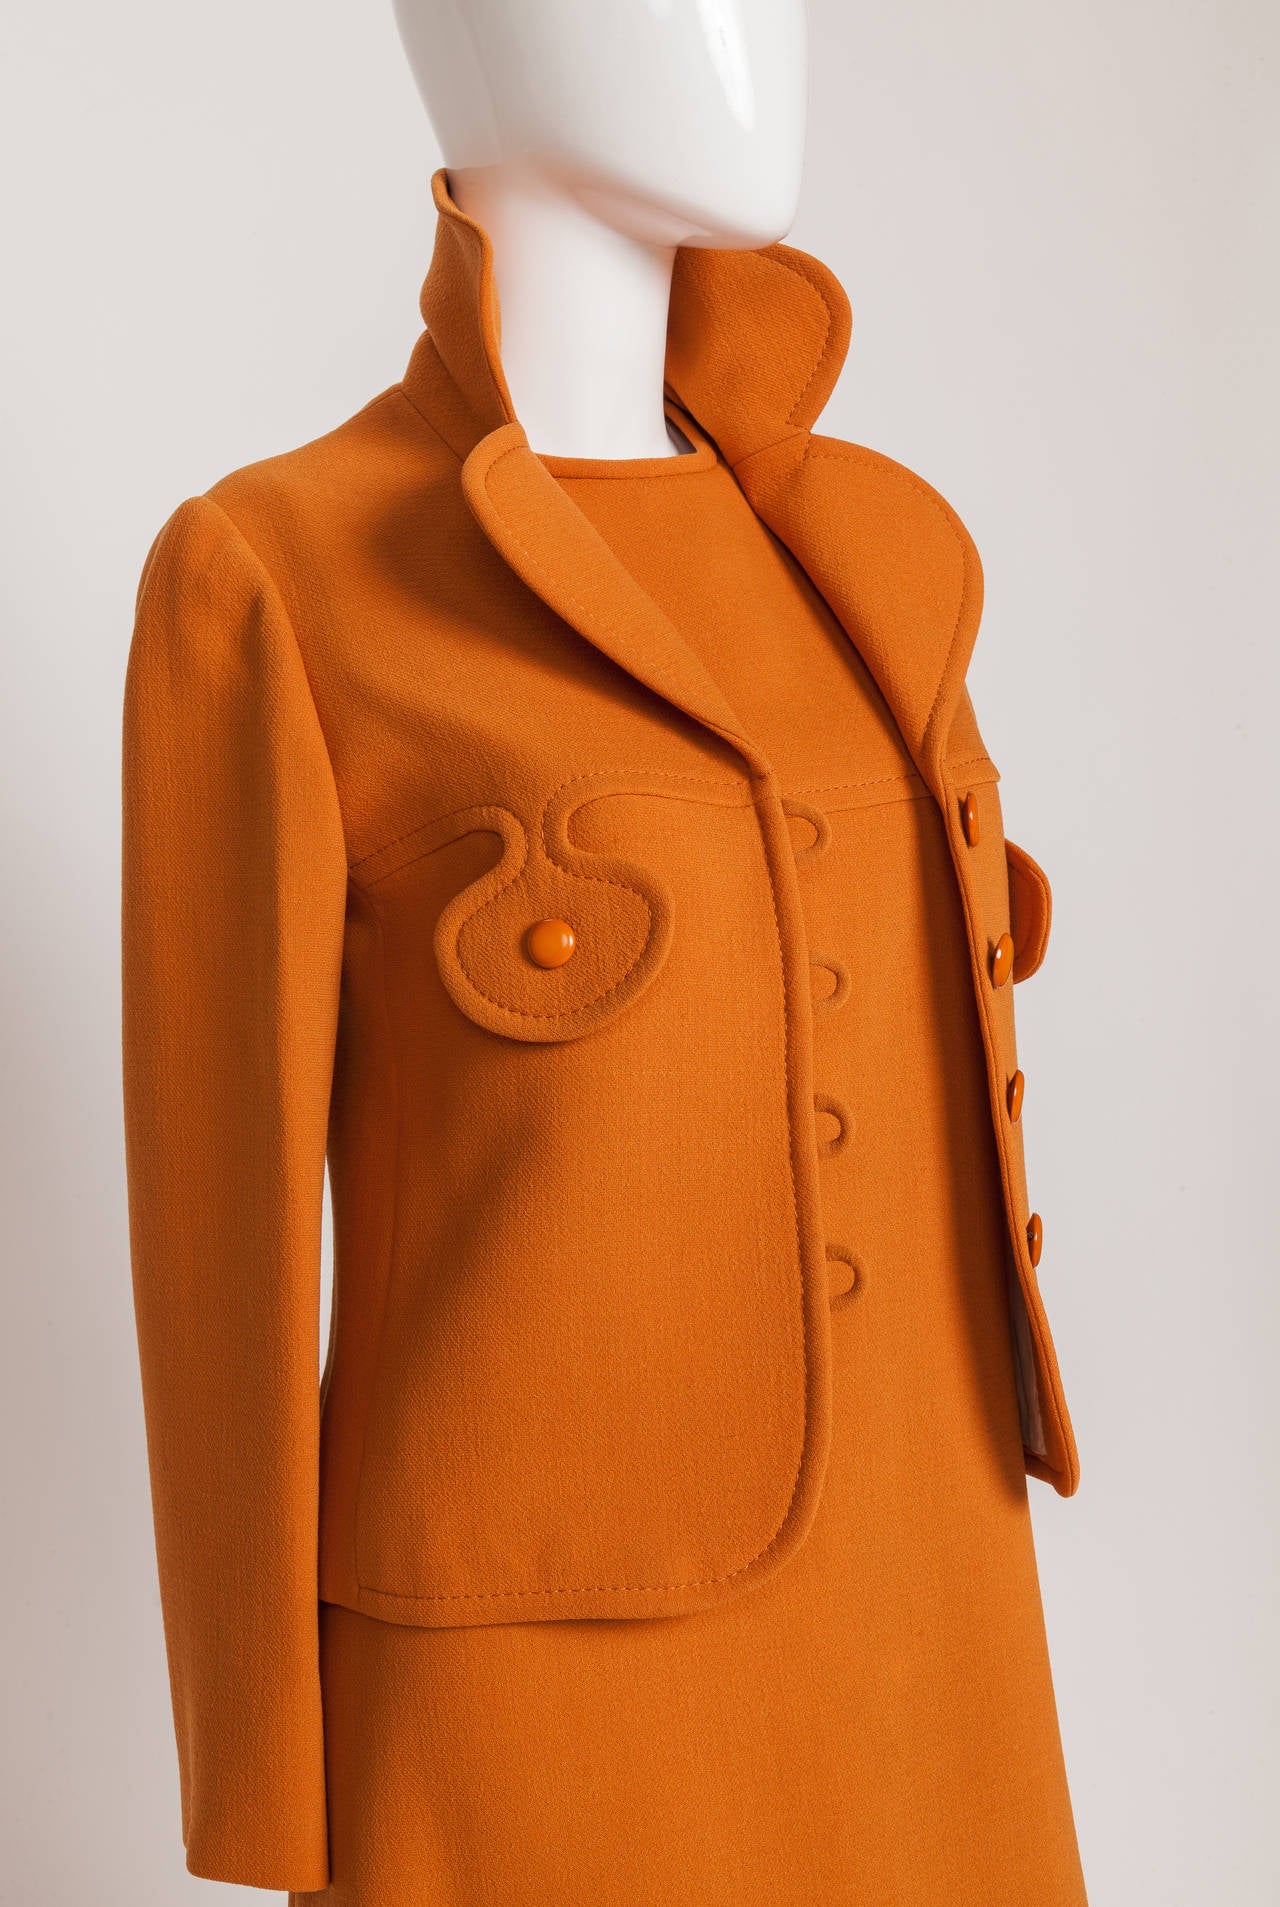 Pierre Cardin Space Age Mod Wool Crepe Jacket and Dress Ensemble ca.1971 In Excellent Condition In Studio City, CA